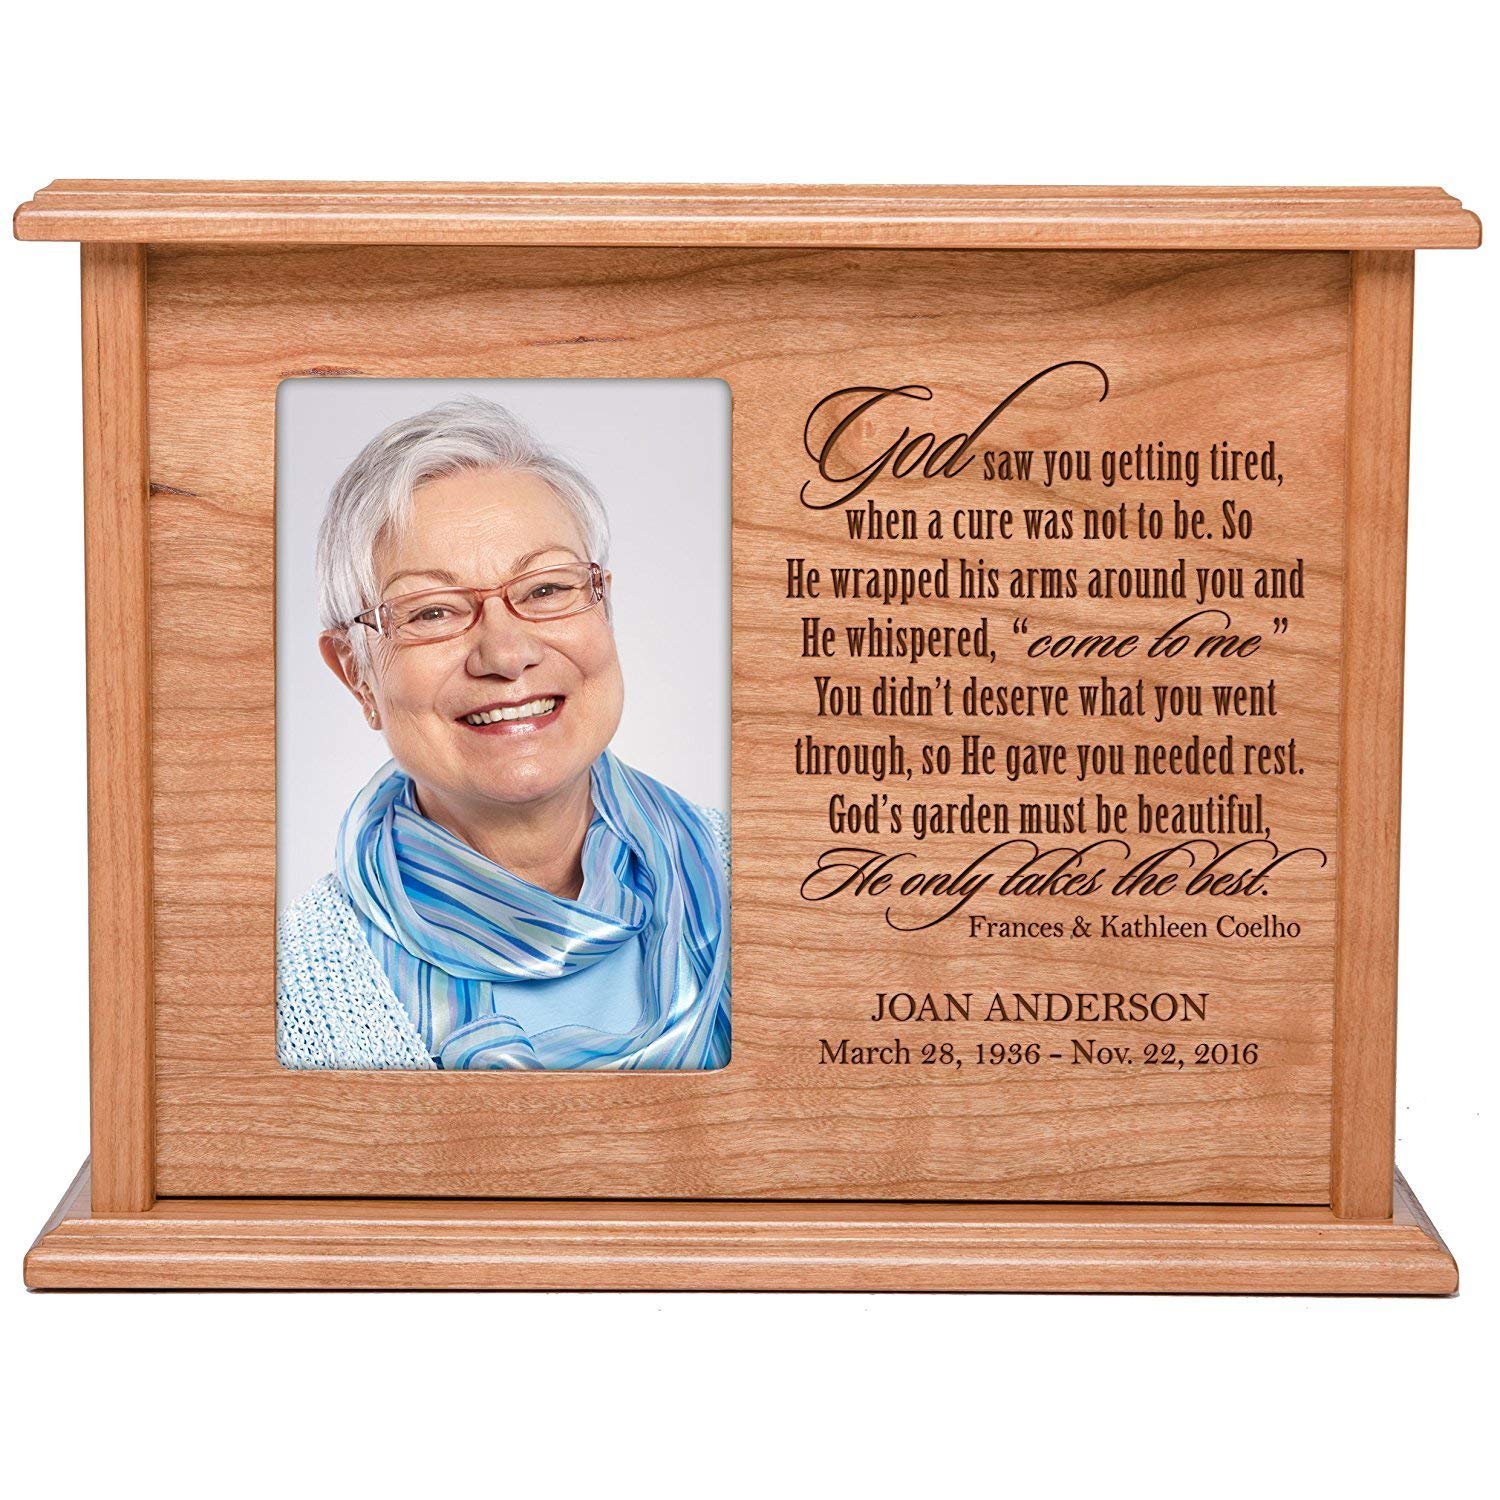 Custom Engraved Photo Cremation Urn Box for Human Ashes